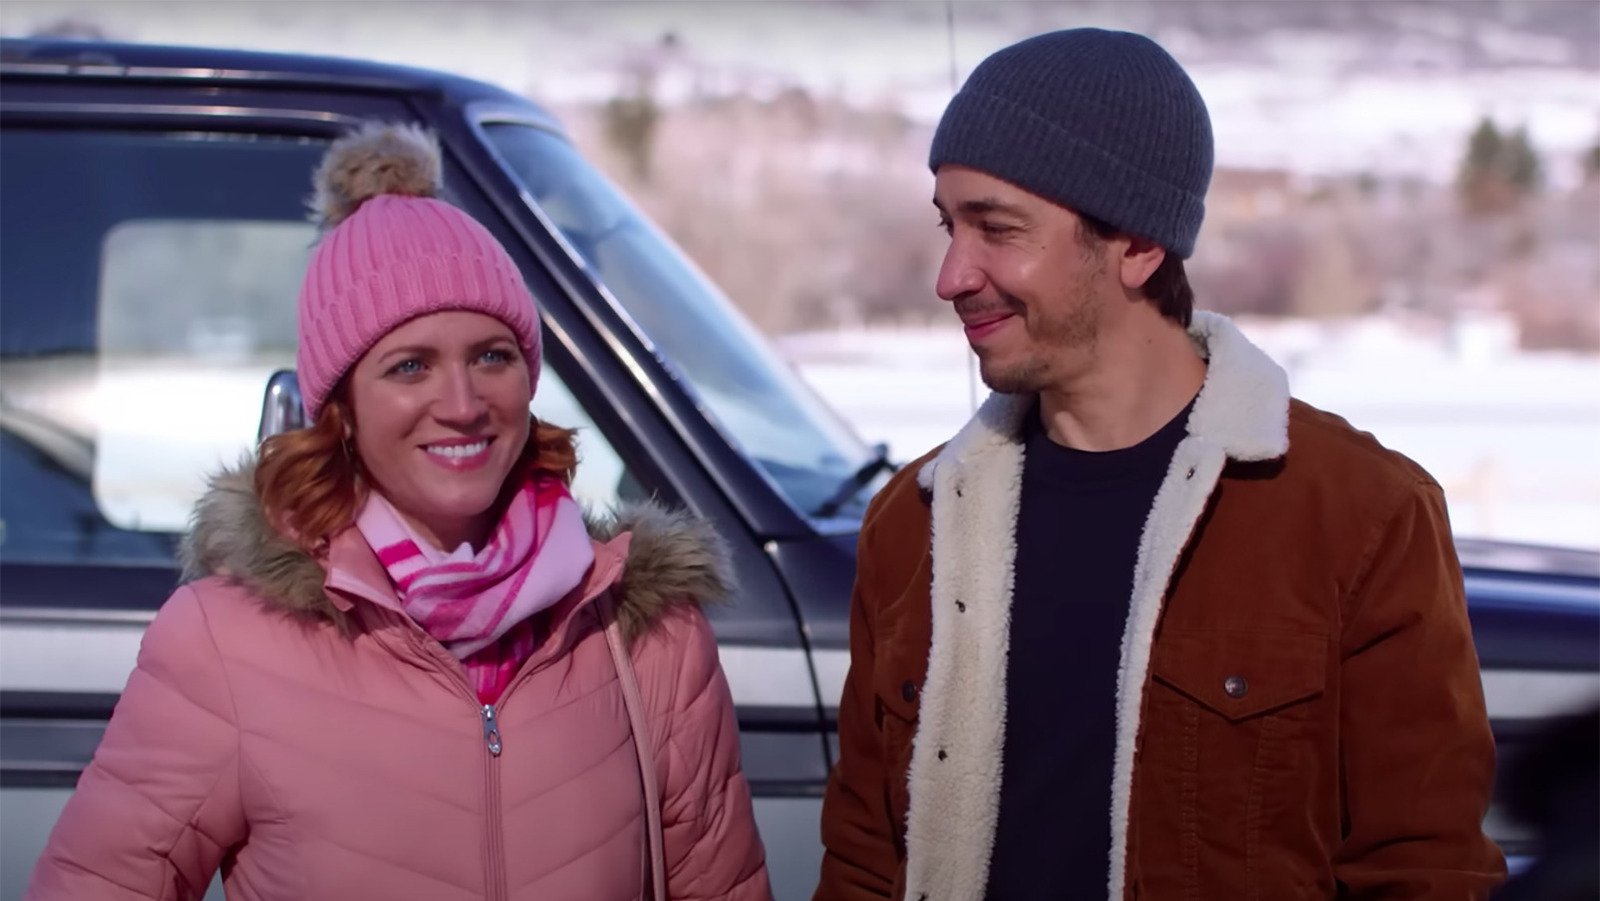 A woman in a pink outfit and a man in a read coat stand next to a truck in the snow